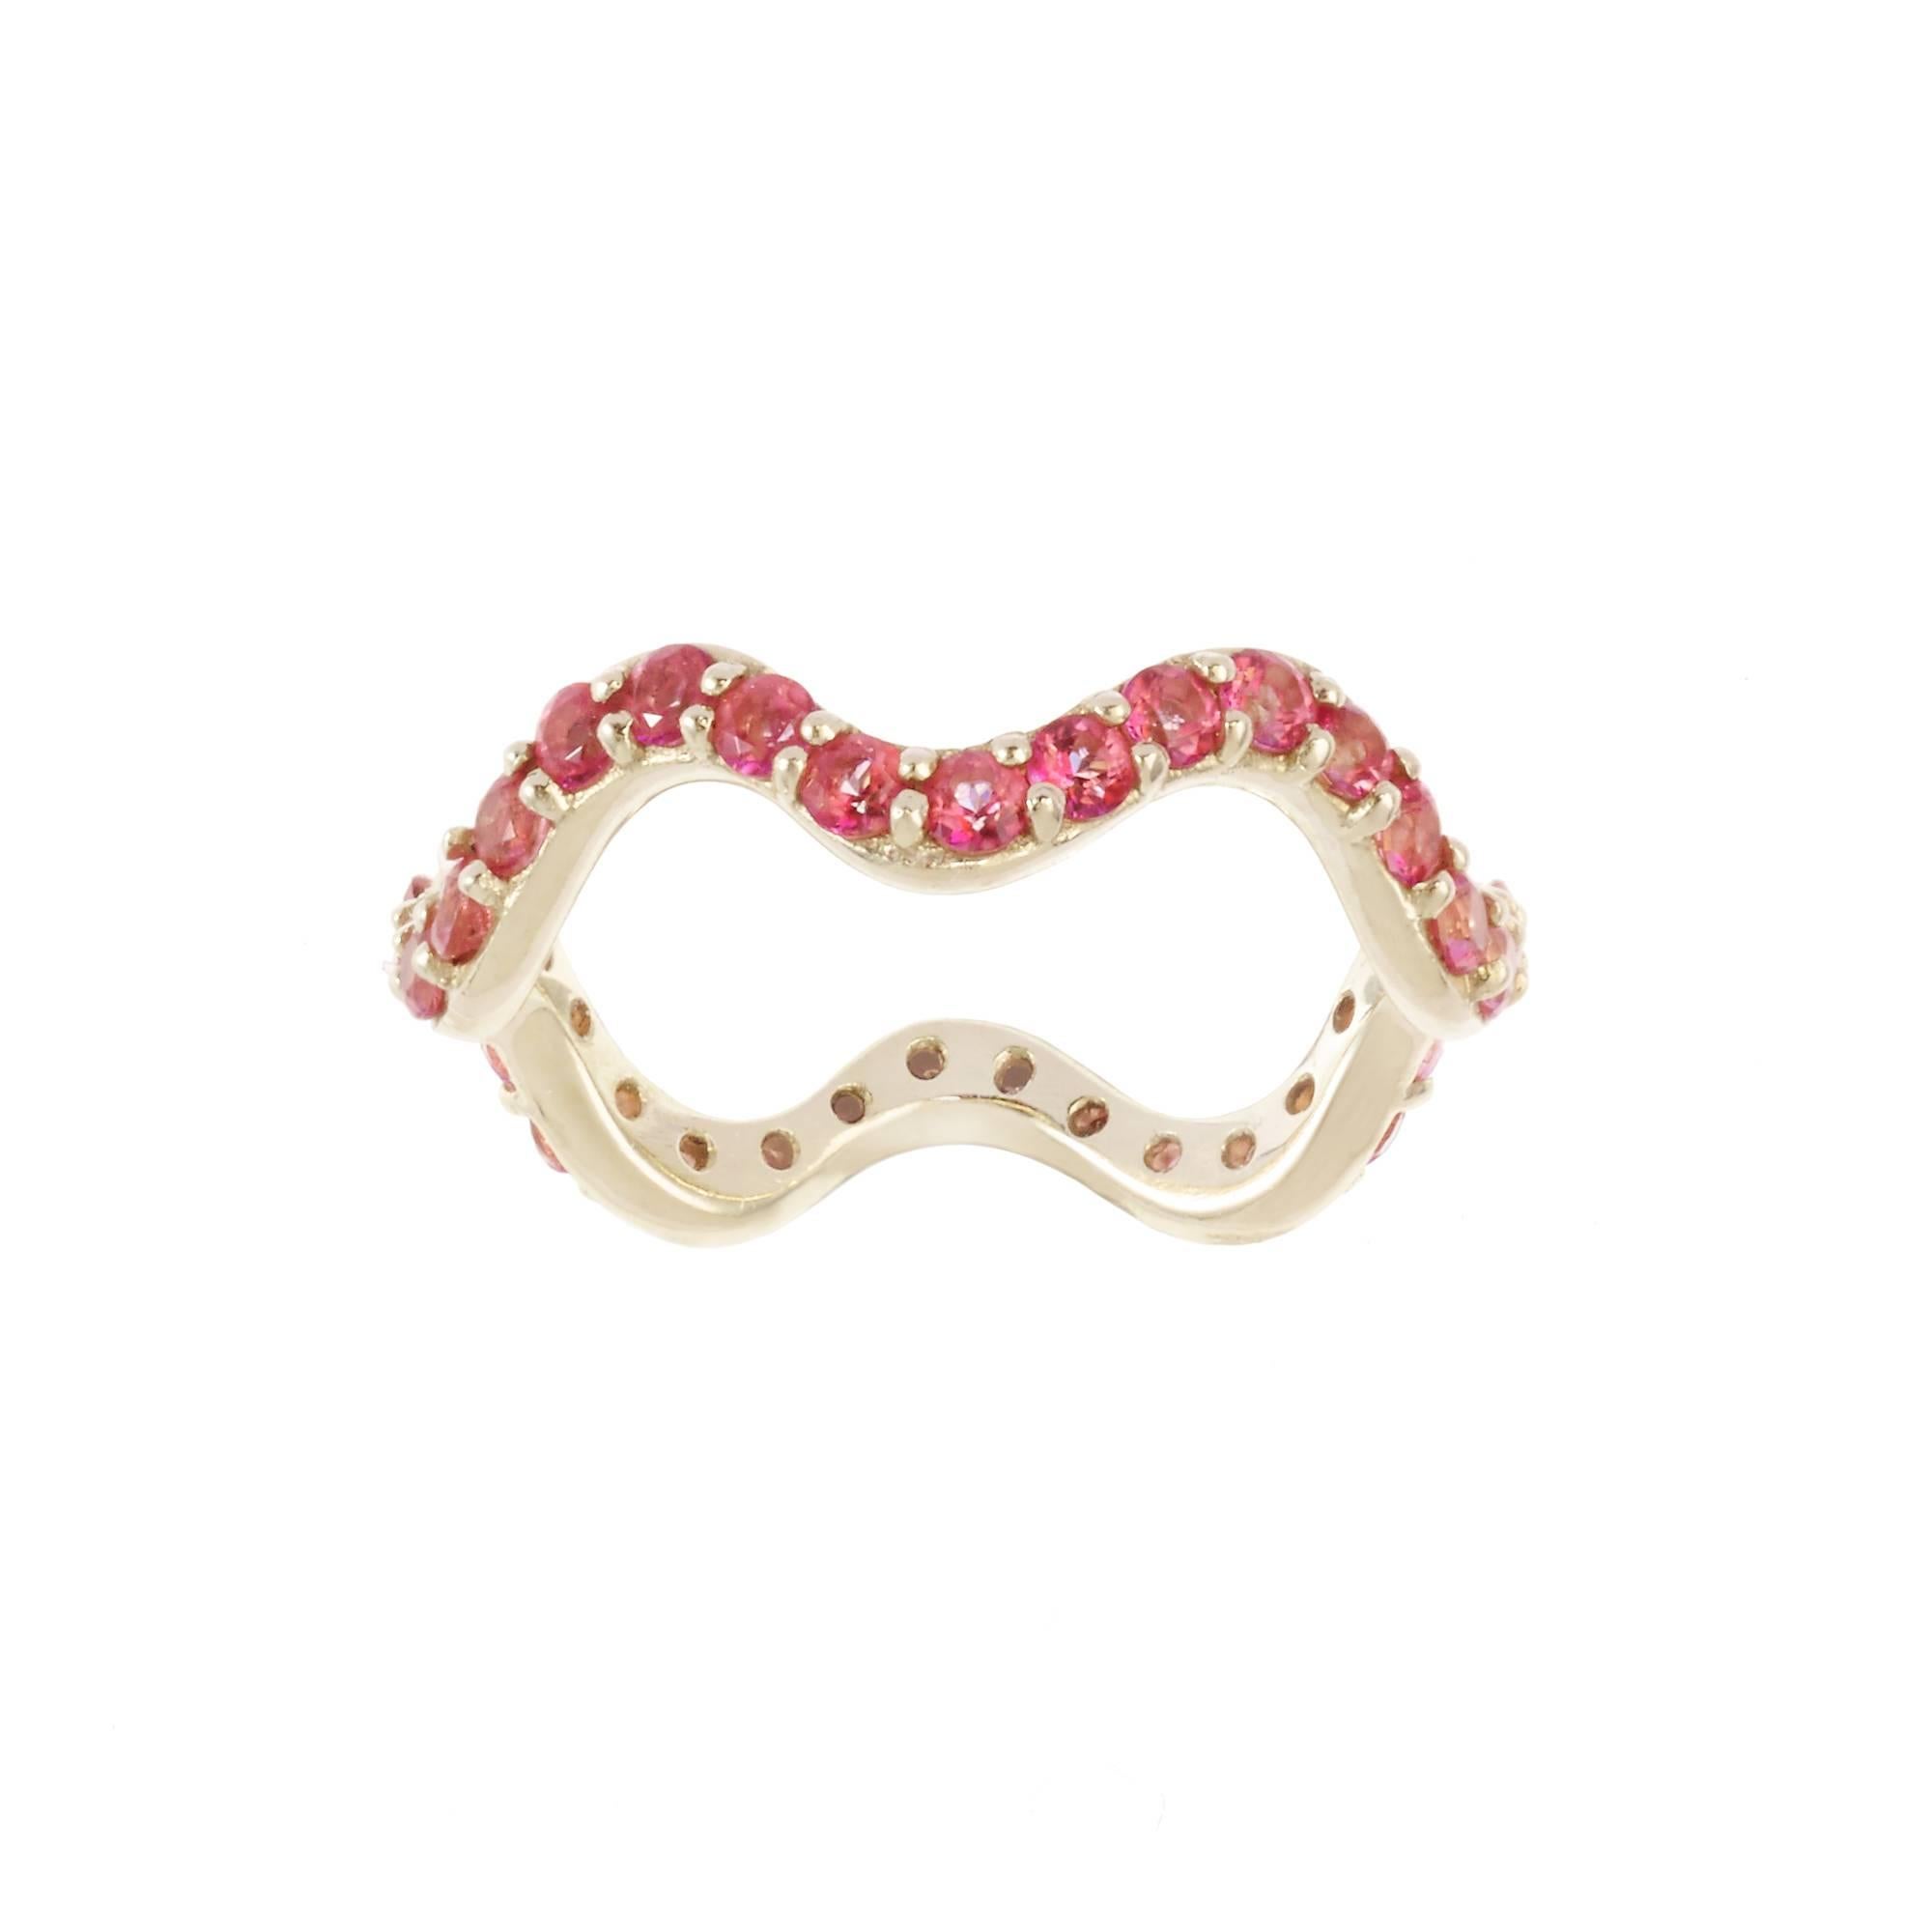 *MADE TO ORDER - 5 WEEK LEAD TIME*

Sabine Getty wiggly pink band ring in 18k yellow gold set with pink topaz

Topaz: 1.32ct

Yellow, pink, green and blue. Four colours inspired by the Memphis Group, the kookiest of Made in Italy designers,